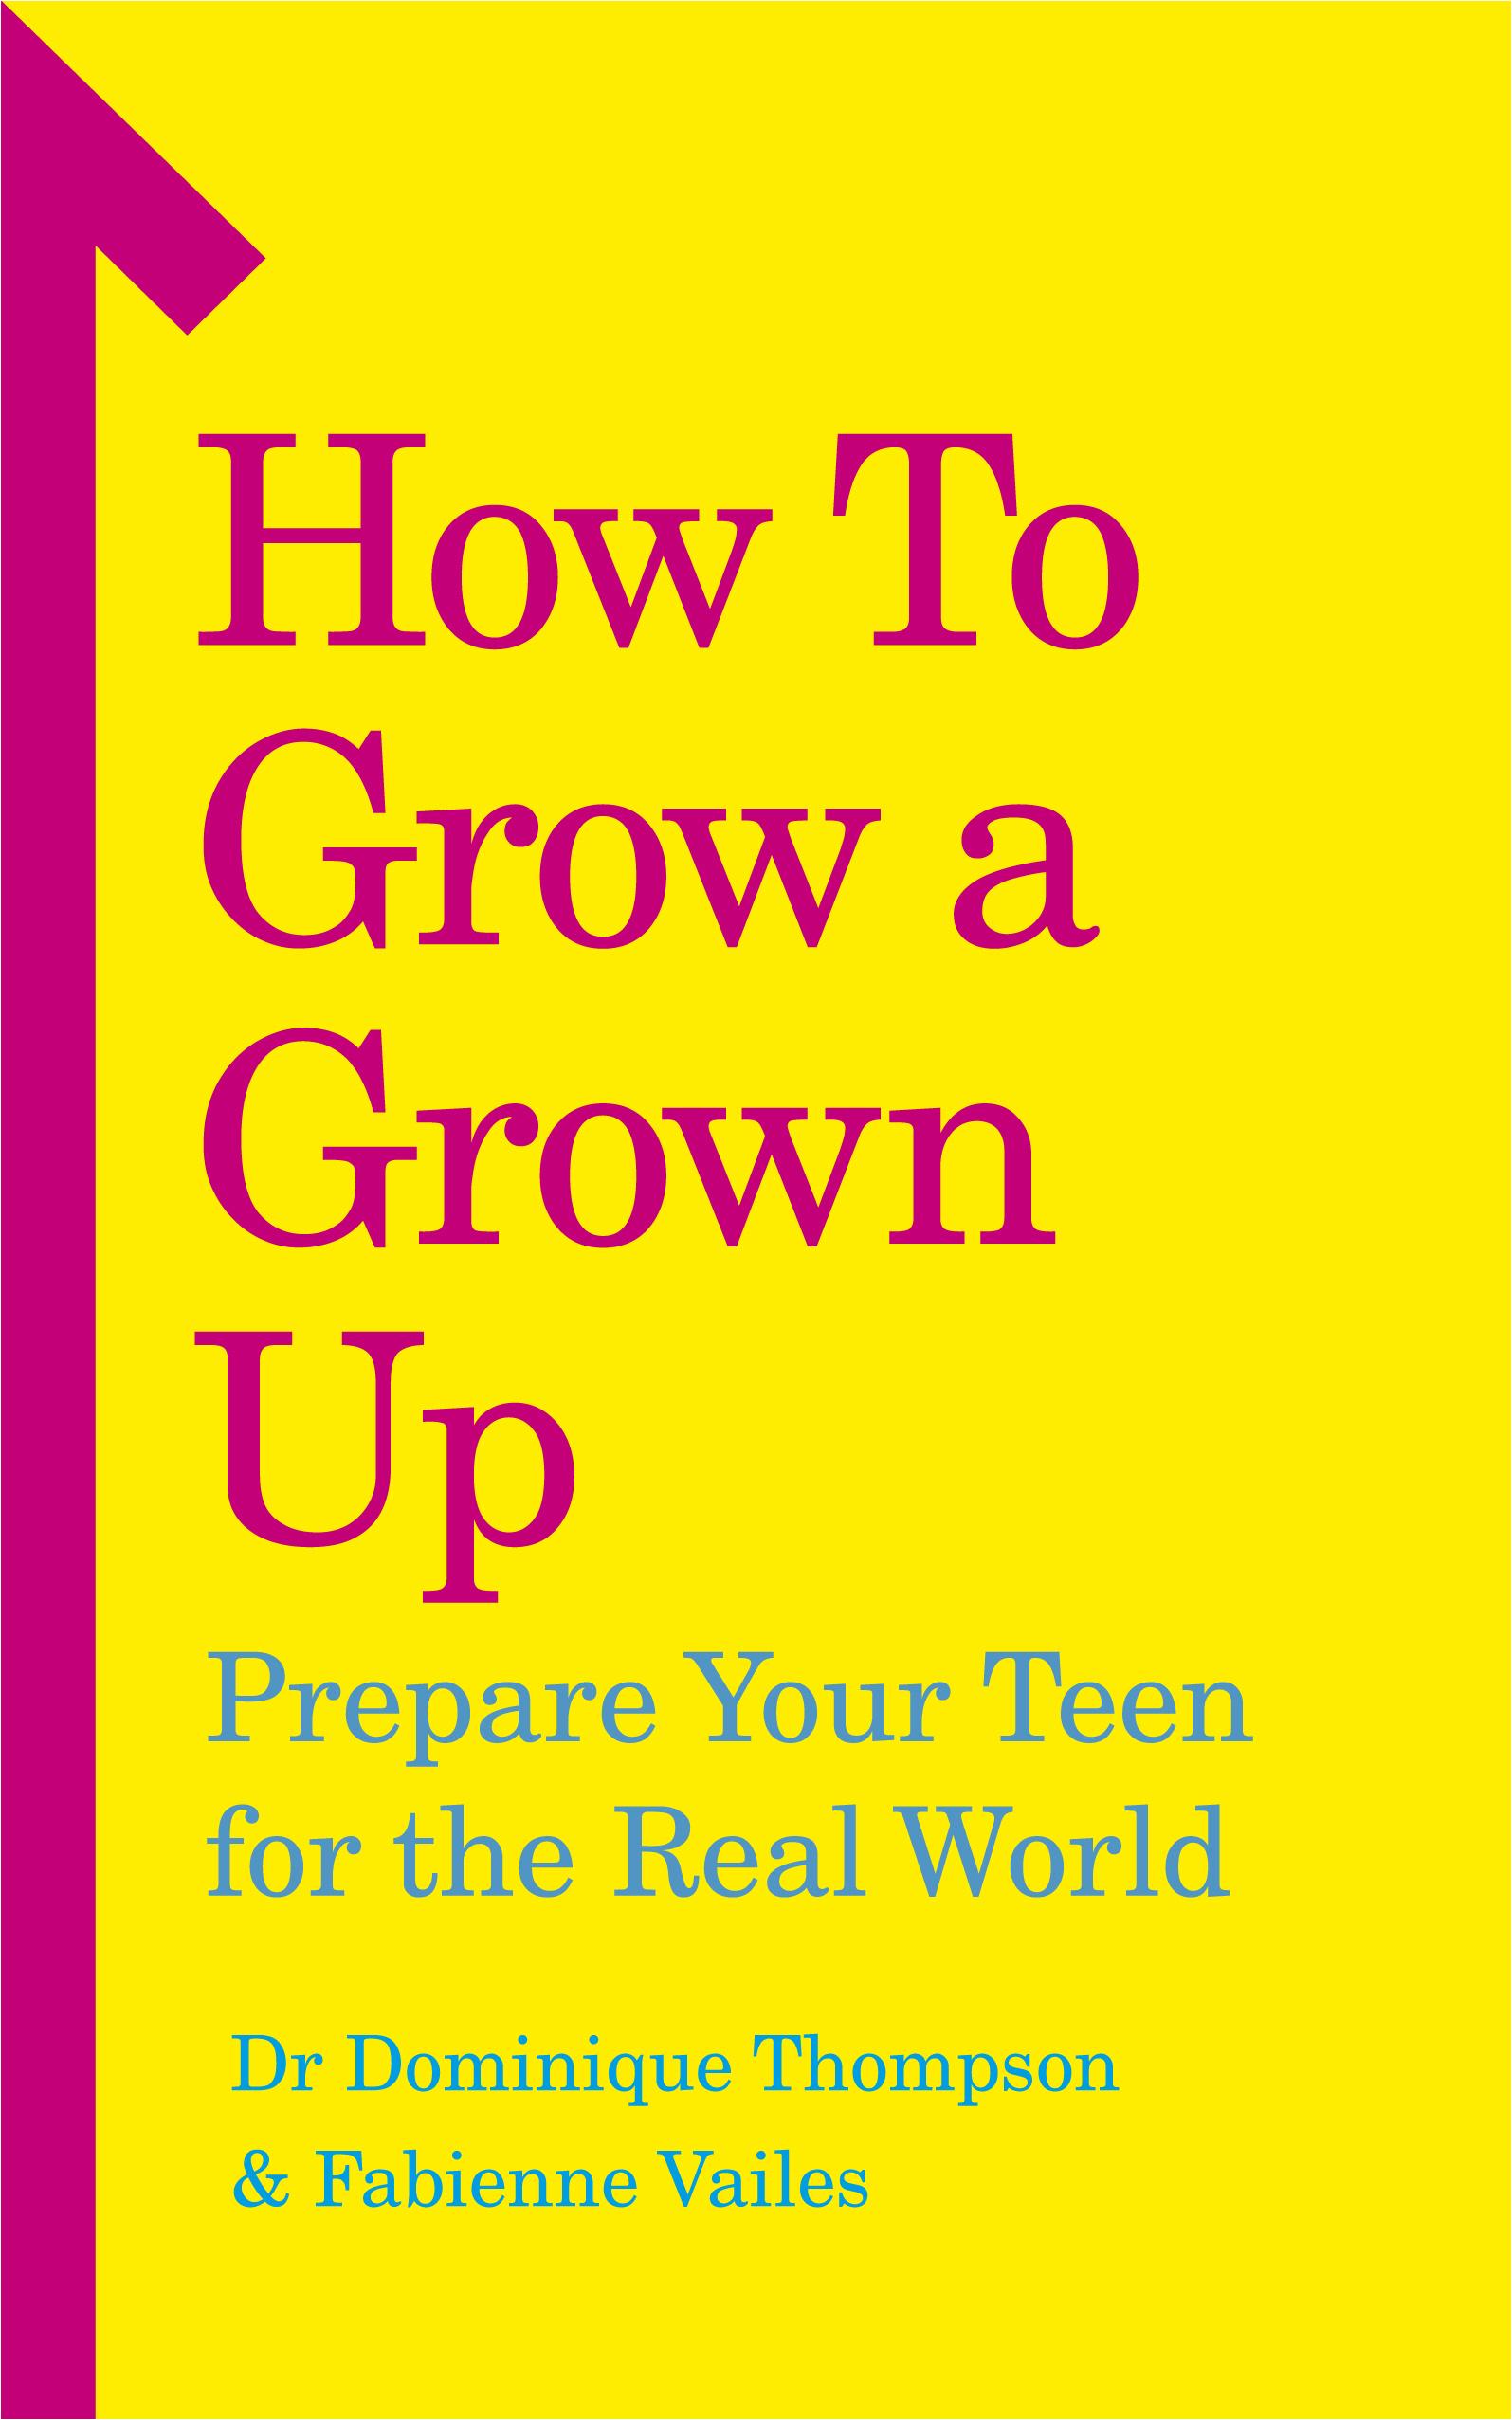 How to Grow a Grown Up - Dominique Thompson